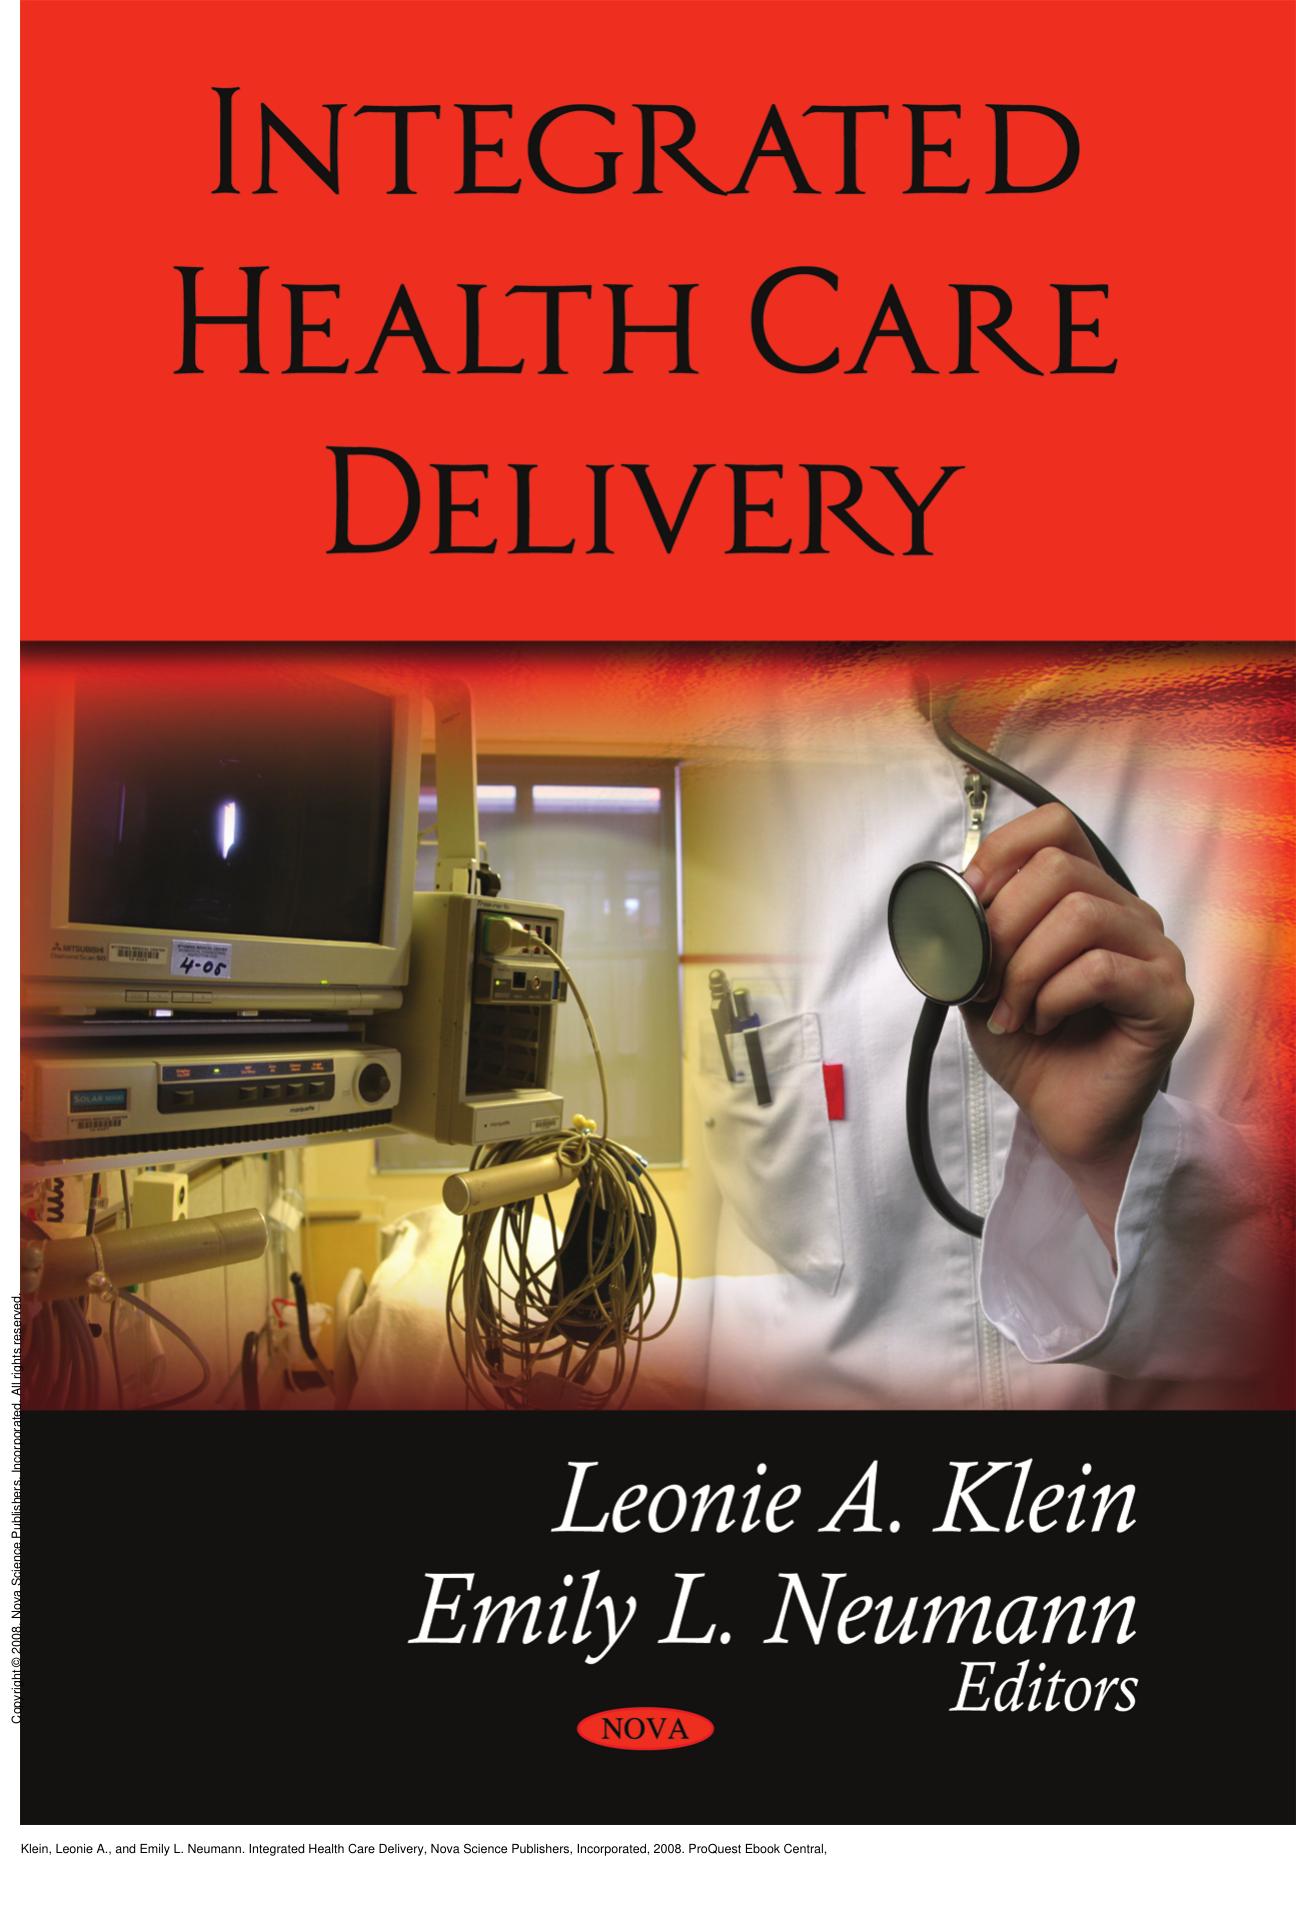 Integrated Health Care Delivery by Leonie A. Klein; Emily L. Neumann